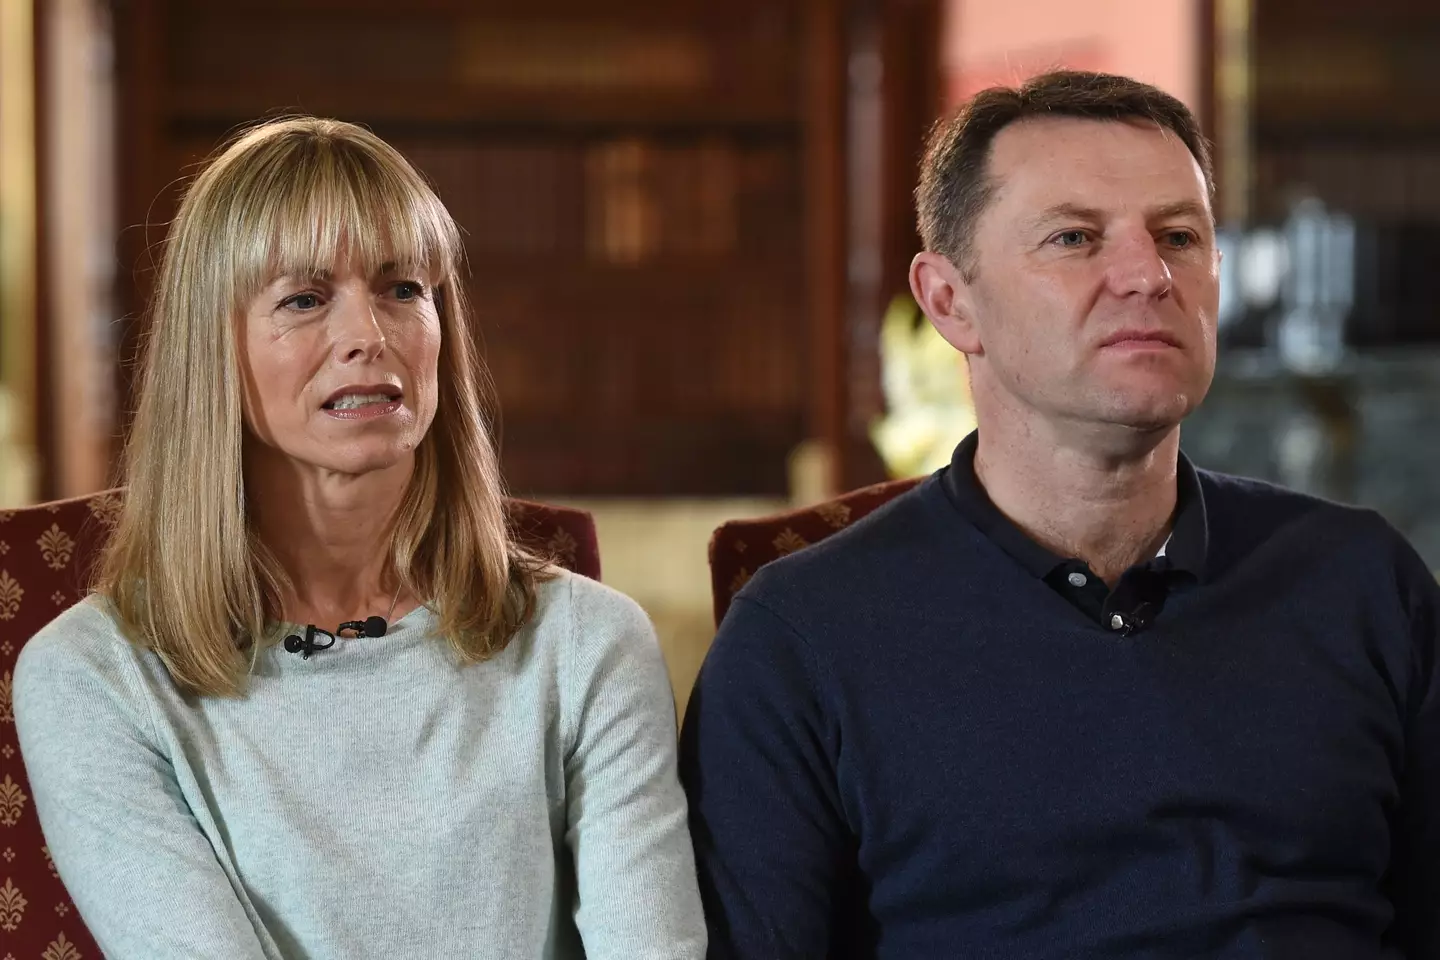 Madeleine McCann's parents have had their libel case against a former detective overturned by the European Court of Human Rights.